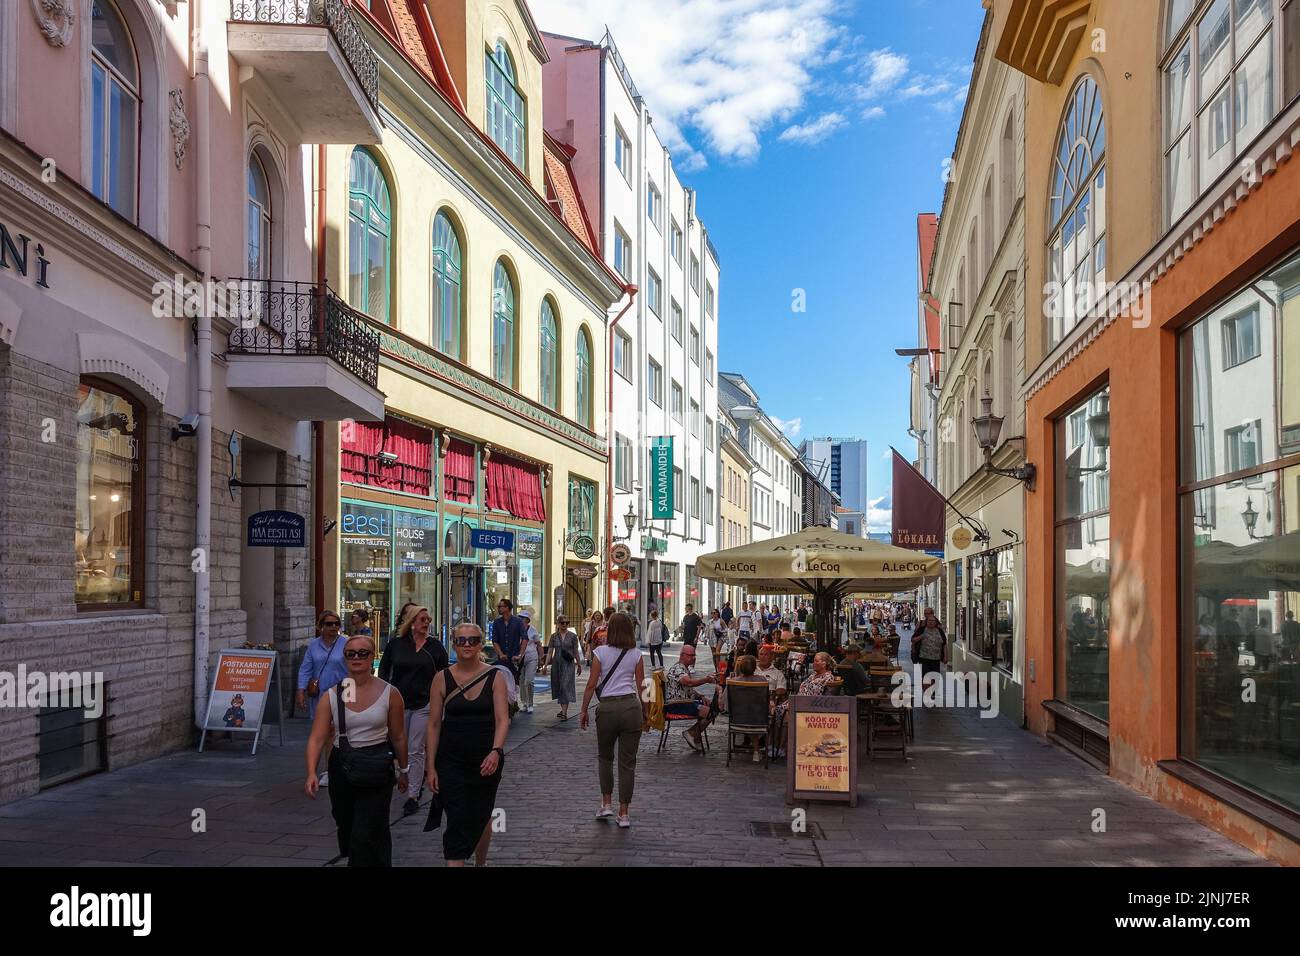 Tallinn, Estonia 31 July 2022  General view of the old town streets with not so many touritst visiting the city is seen in Tallinn, Estonia on 31 July 2022  (Photo by Vadim Pacajev / Sipa USA) Stock Photo